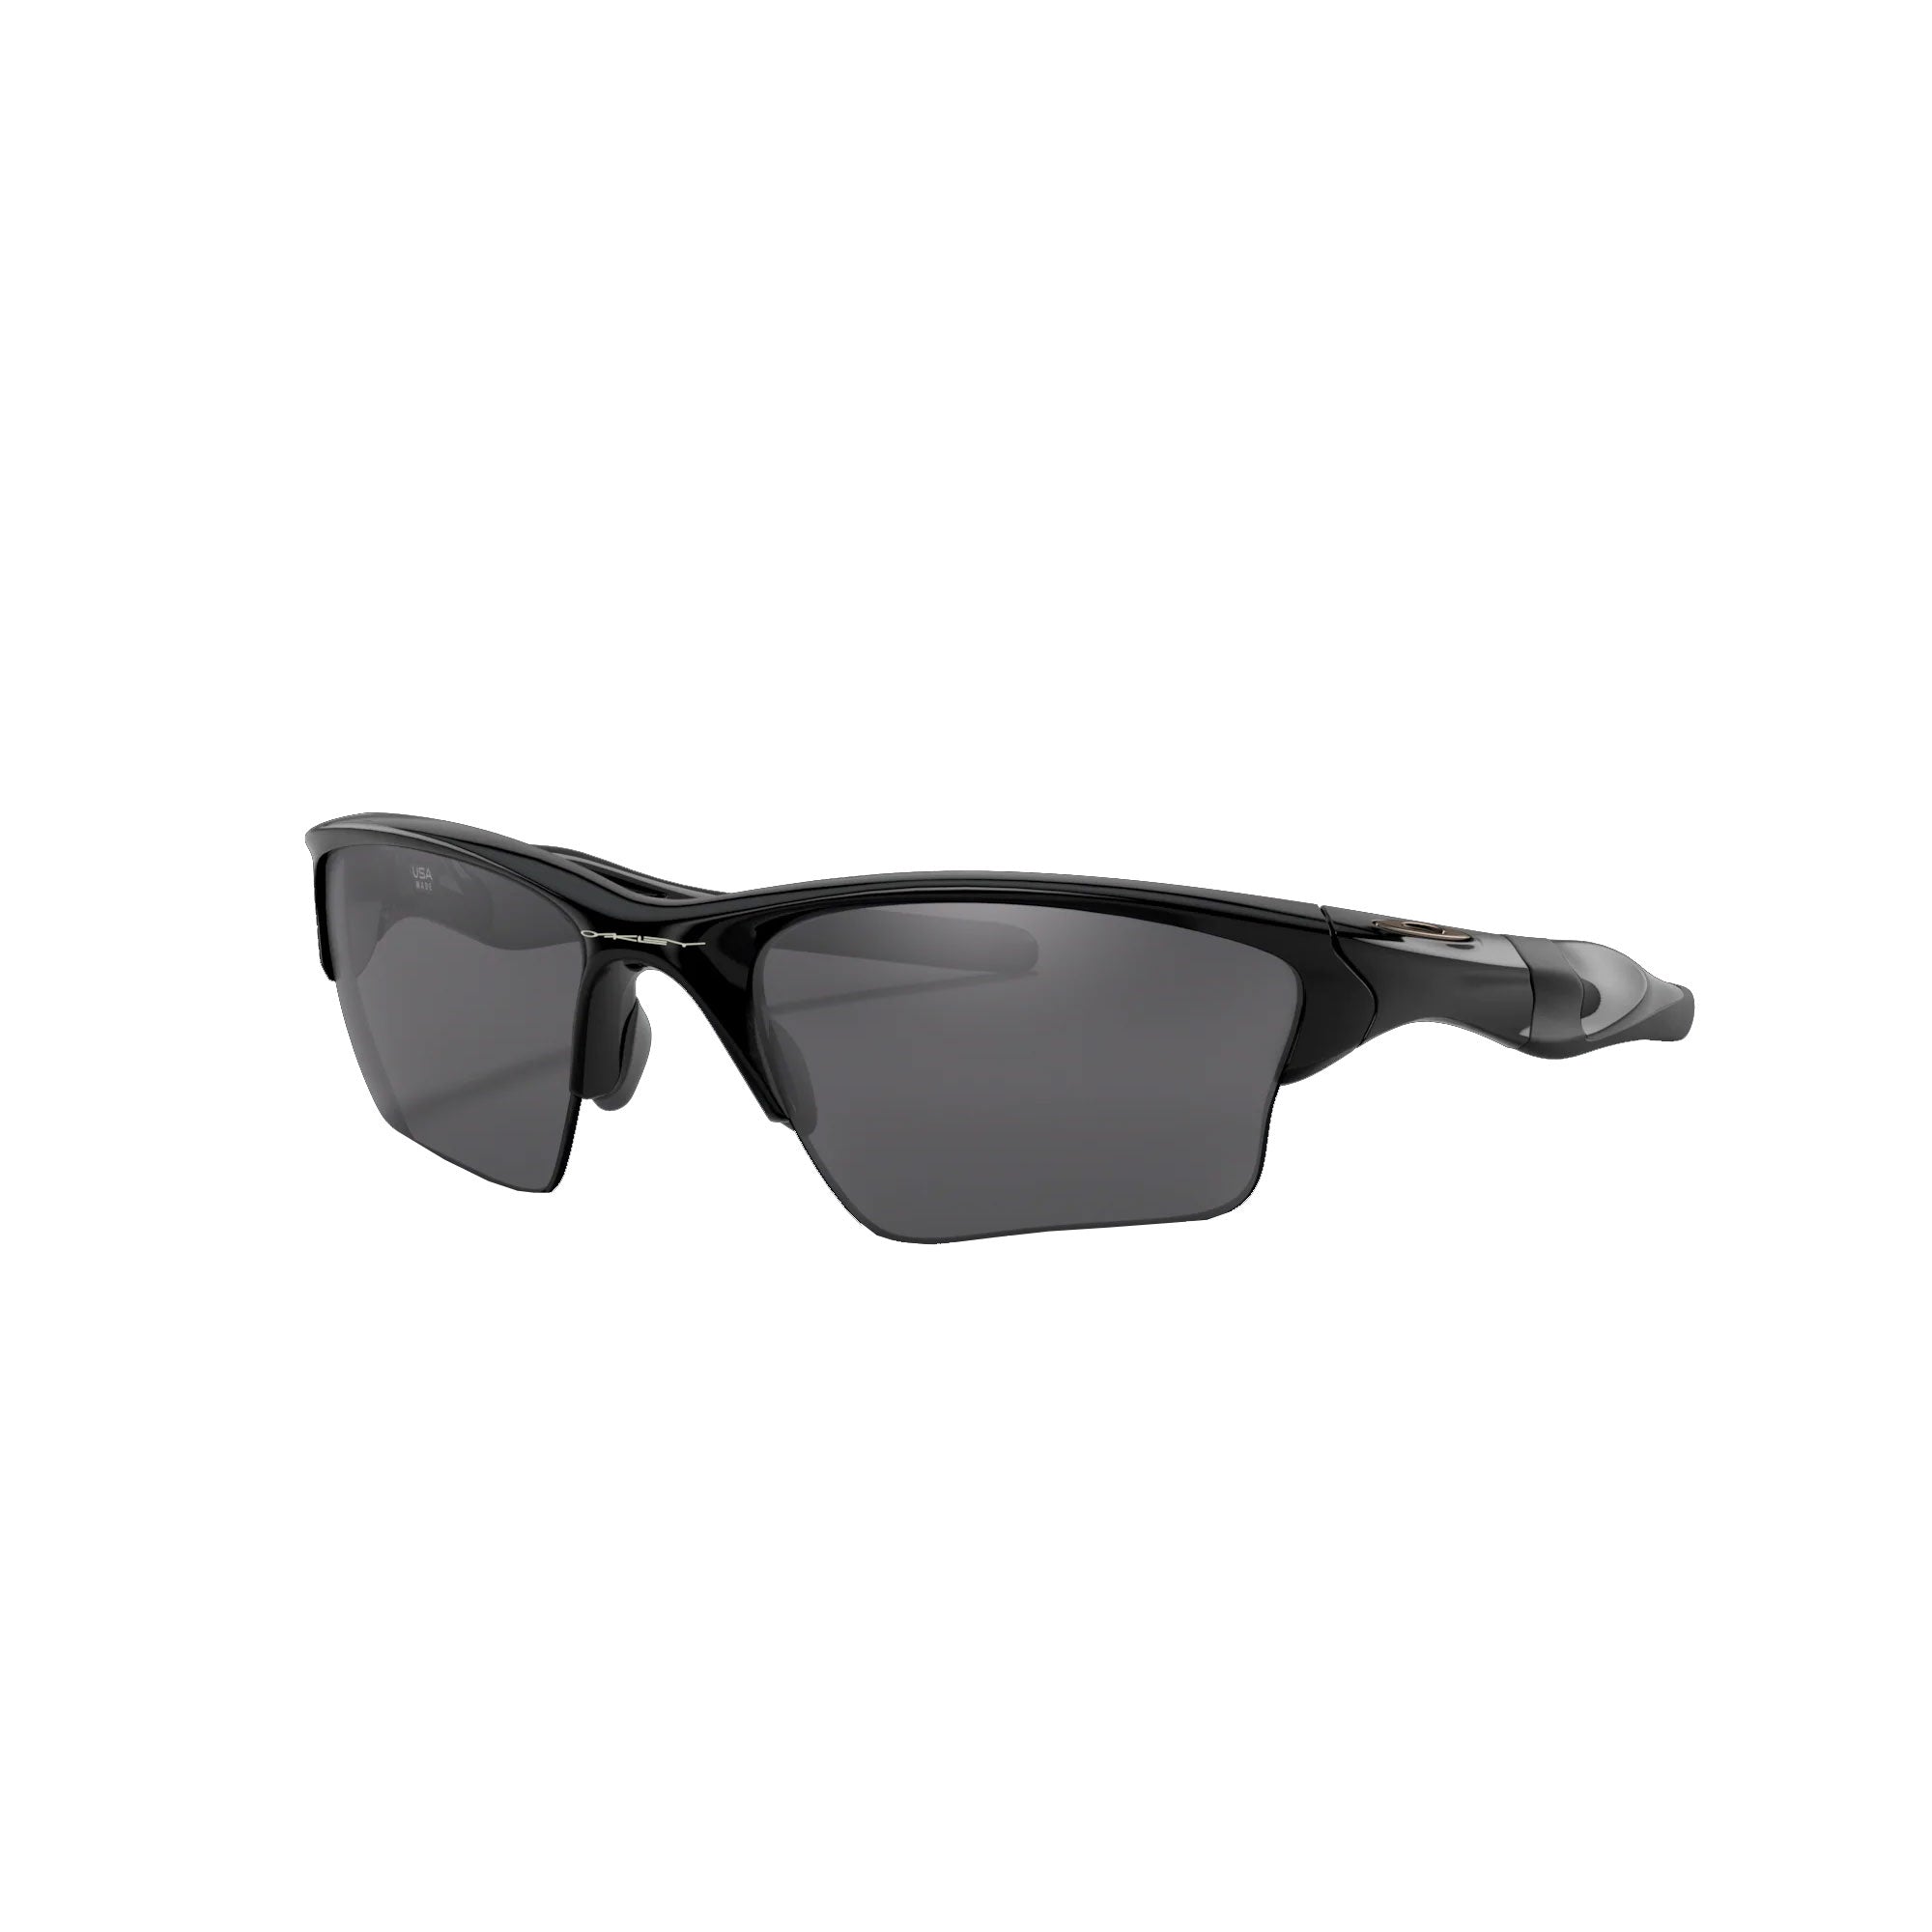 Oakley Sunglasses Is Offering 20% Off ALL Models, Including New